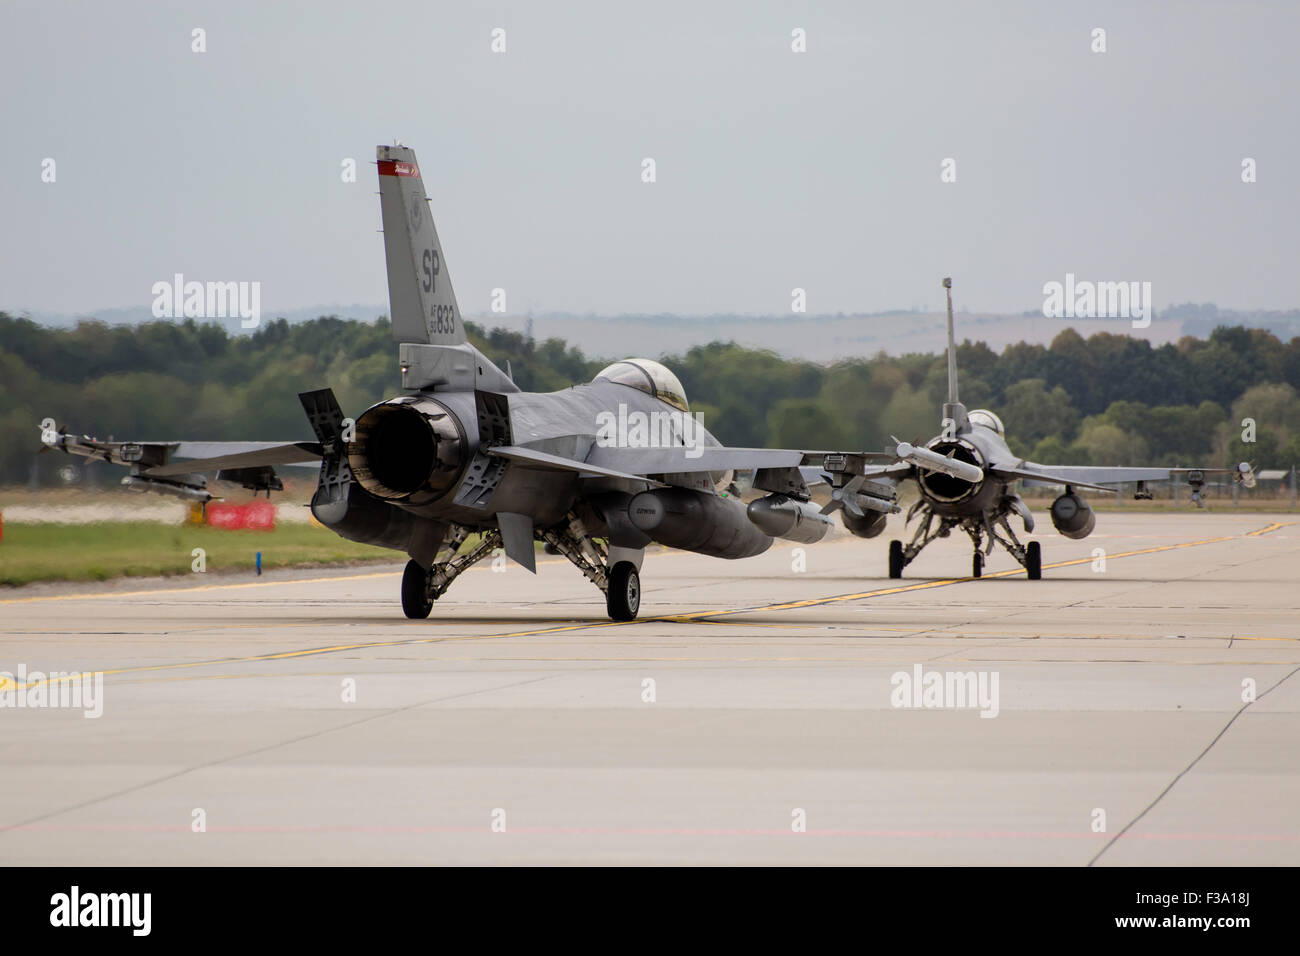 A pair of U.S. Air Force F-16C Fighting Falcons taxiing on the runway in Ostrava, Czech Republic. Stock Photo